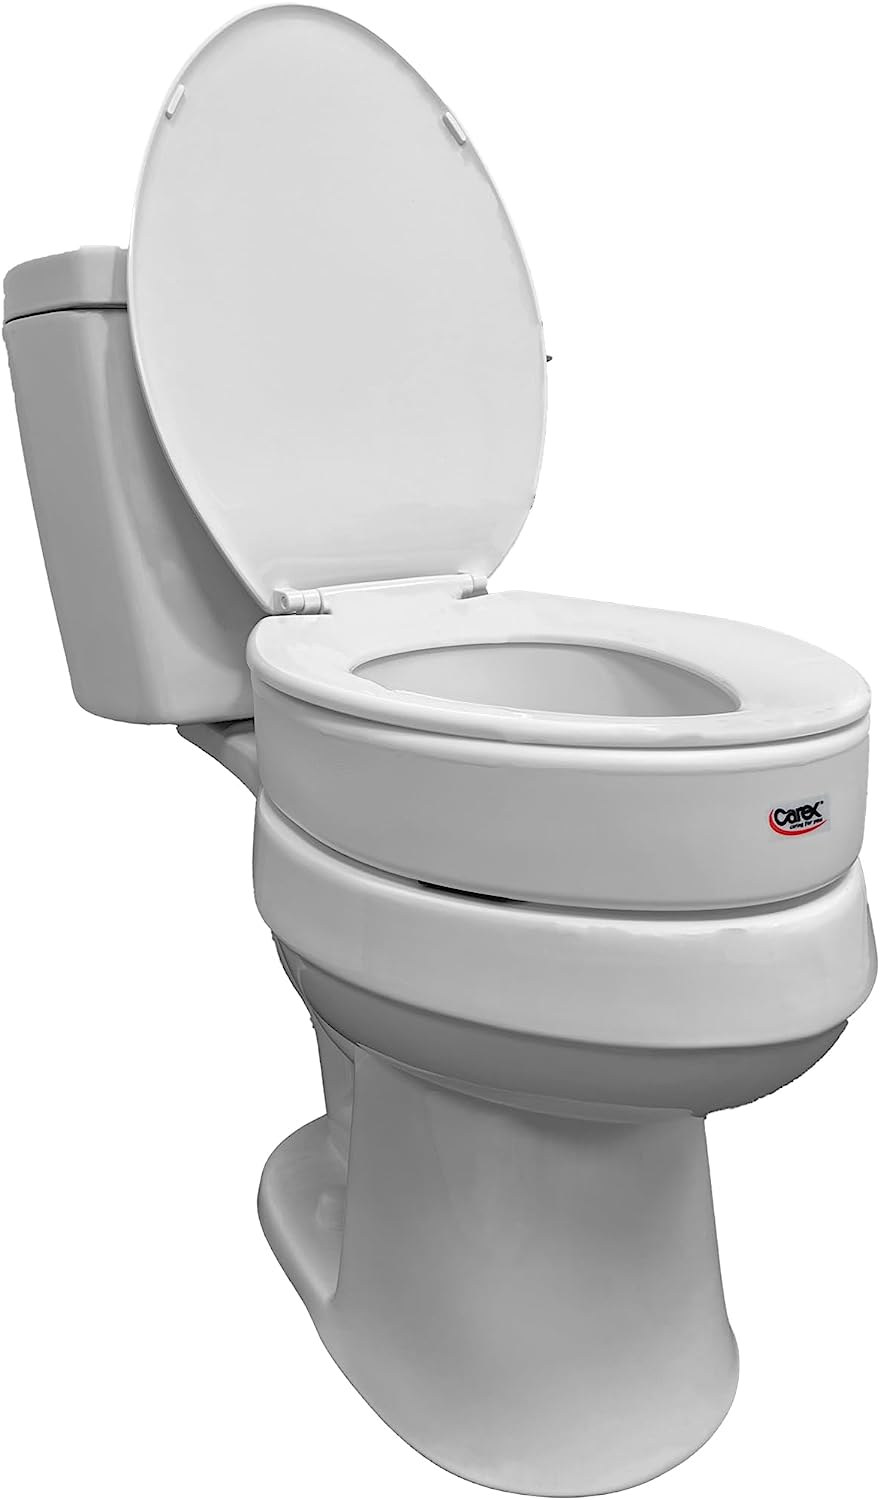 Carex Toilet Seat Elevator - For Elongated Toilet Seats